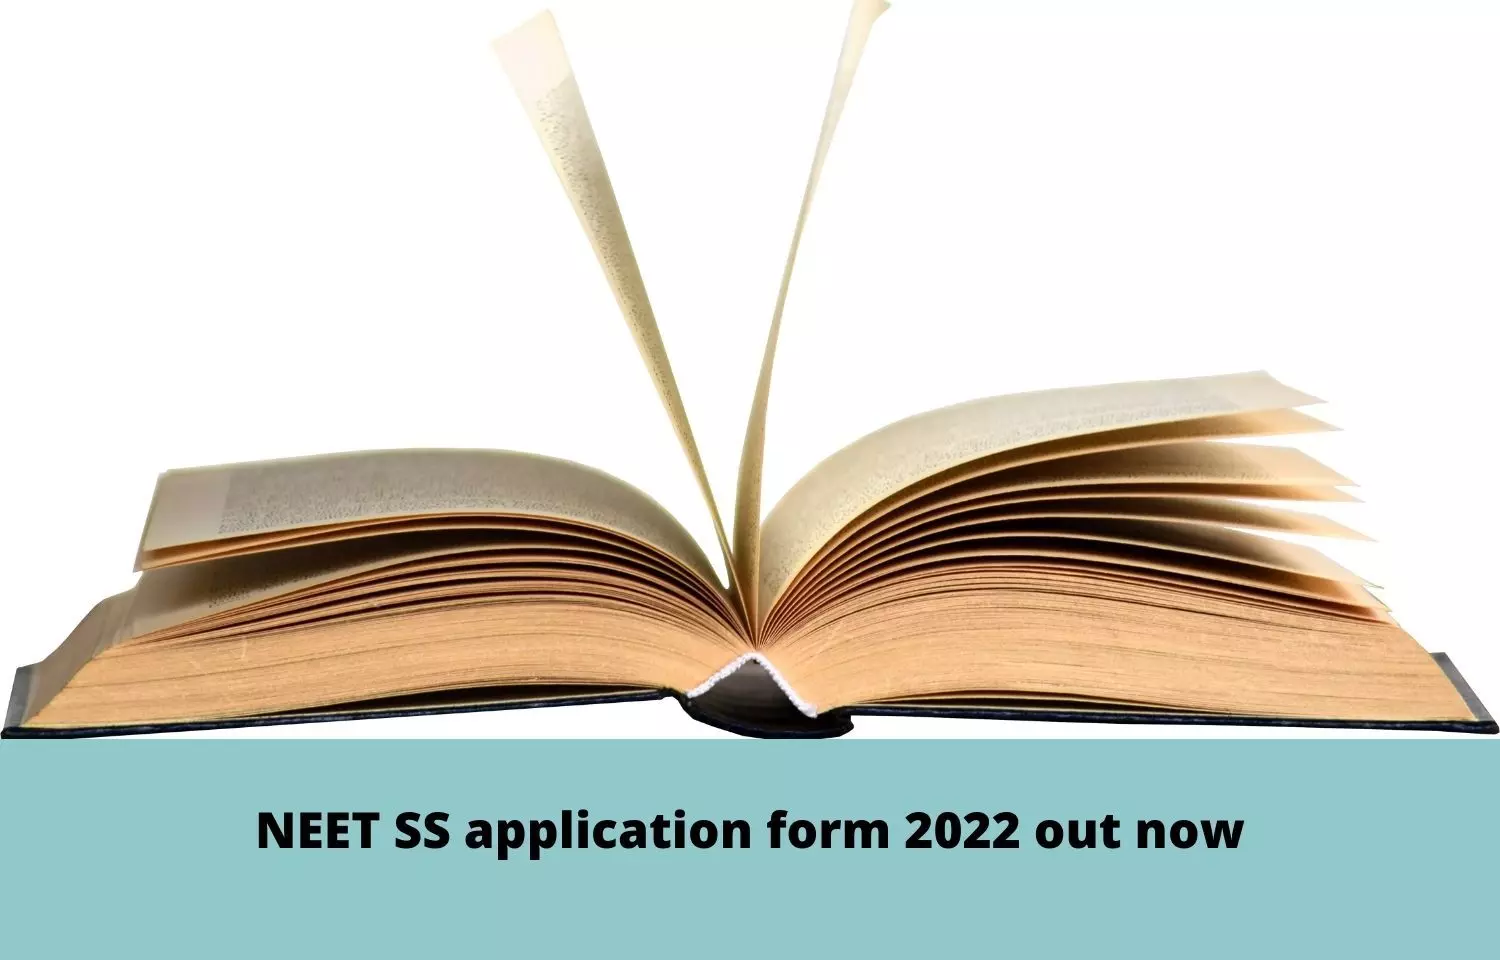 NEET SS application form 2022 out now